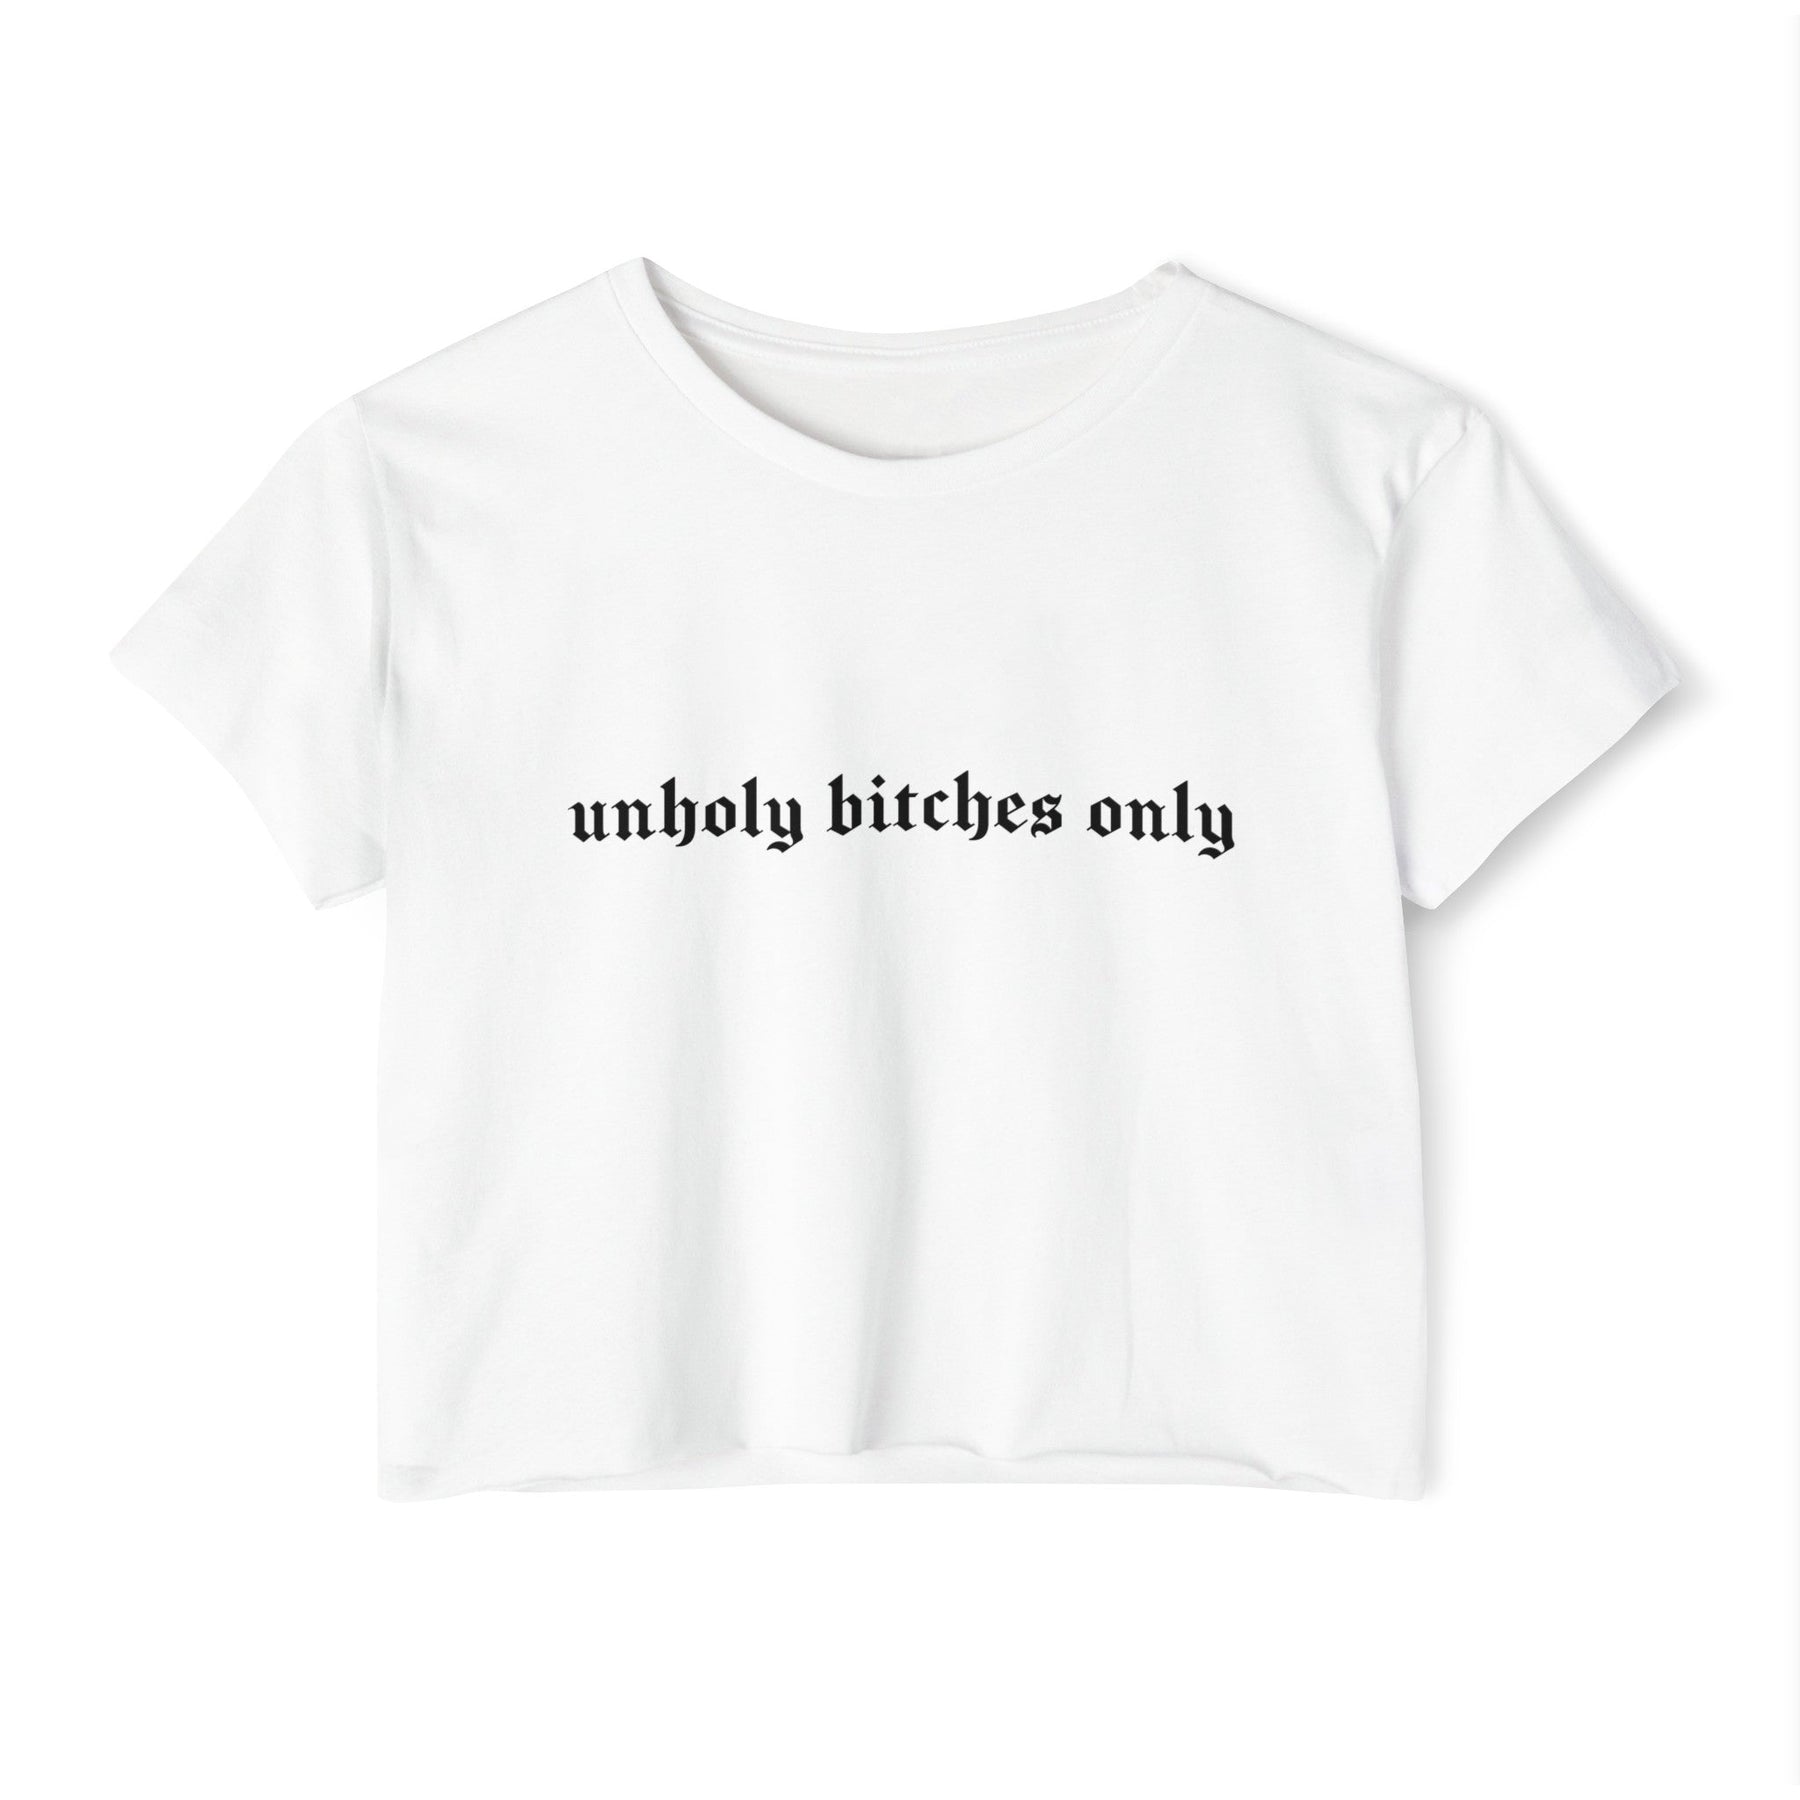 Unholy Bitches Only Women's Lightweight Crop Top - Goth Cloth Co.T - Shirt46591250483991089896